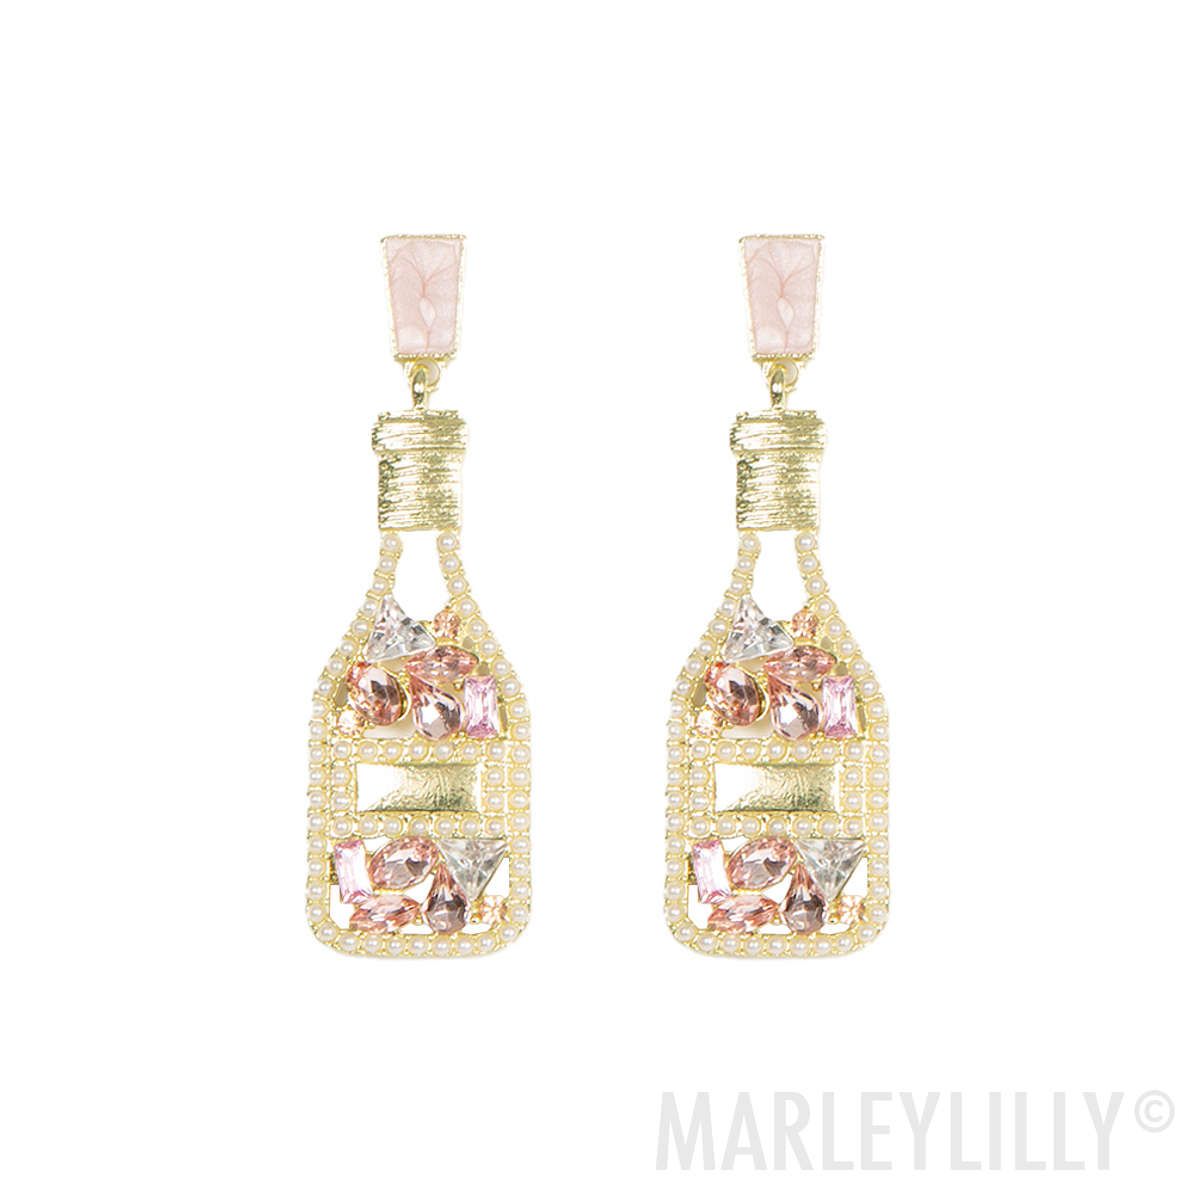 Rosé All Day Earrings | Marleylilly